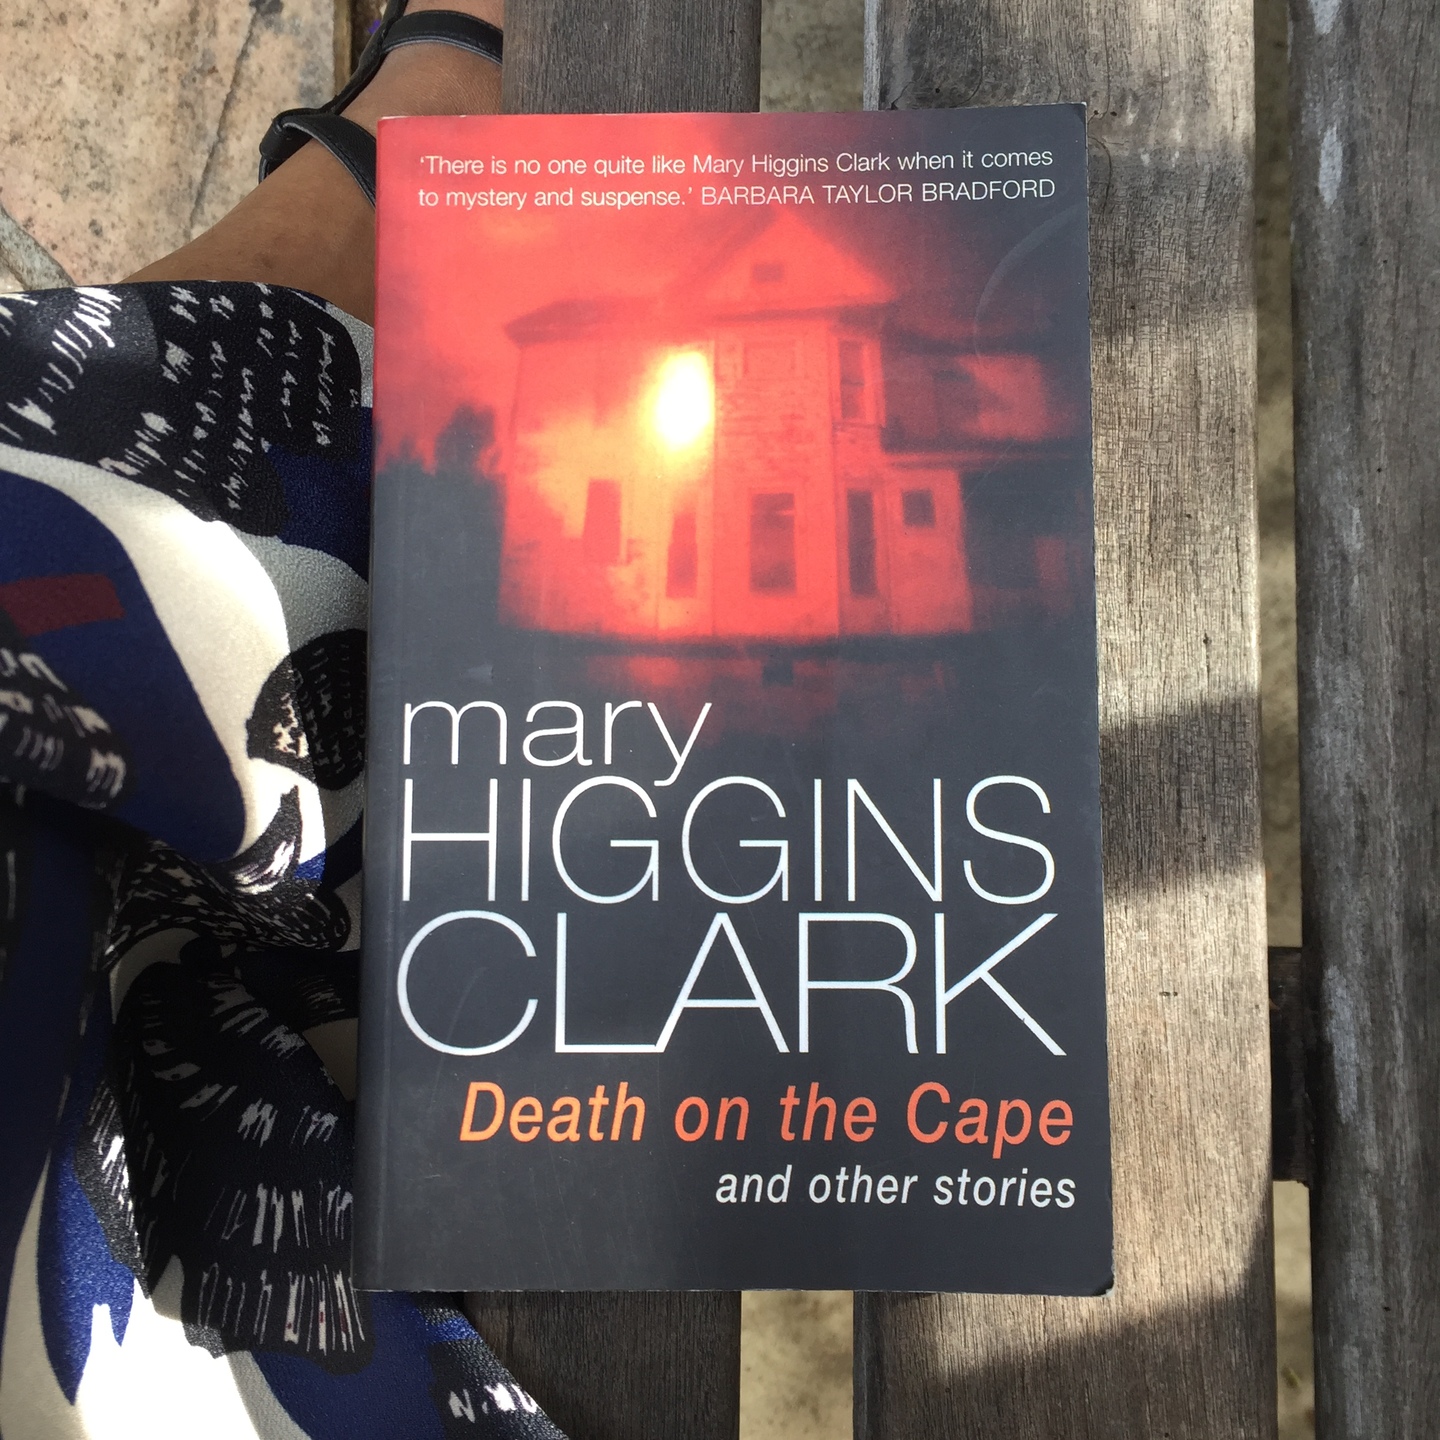 Death on the Cape and Other Stories by Mary Higgins Clark [Paperback]